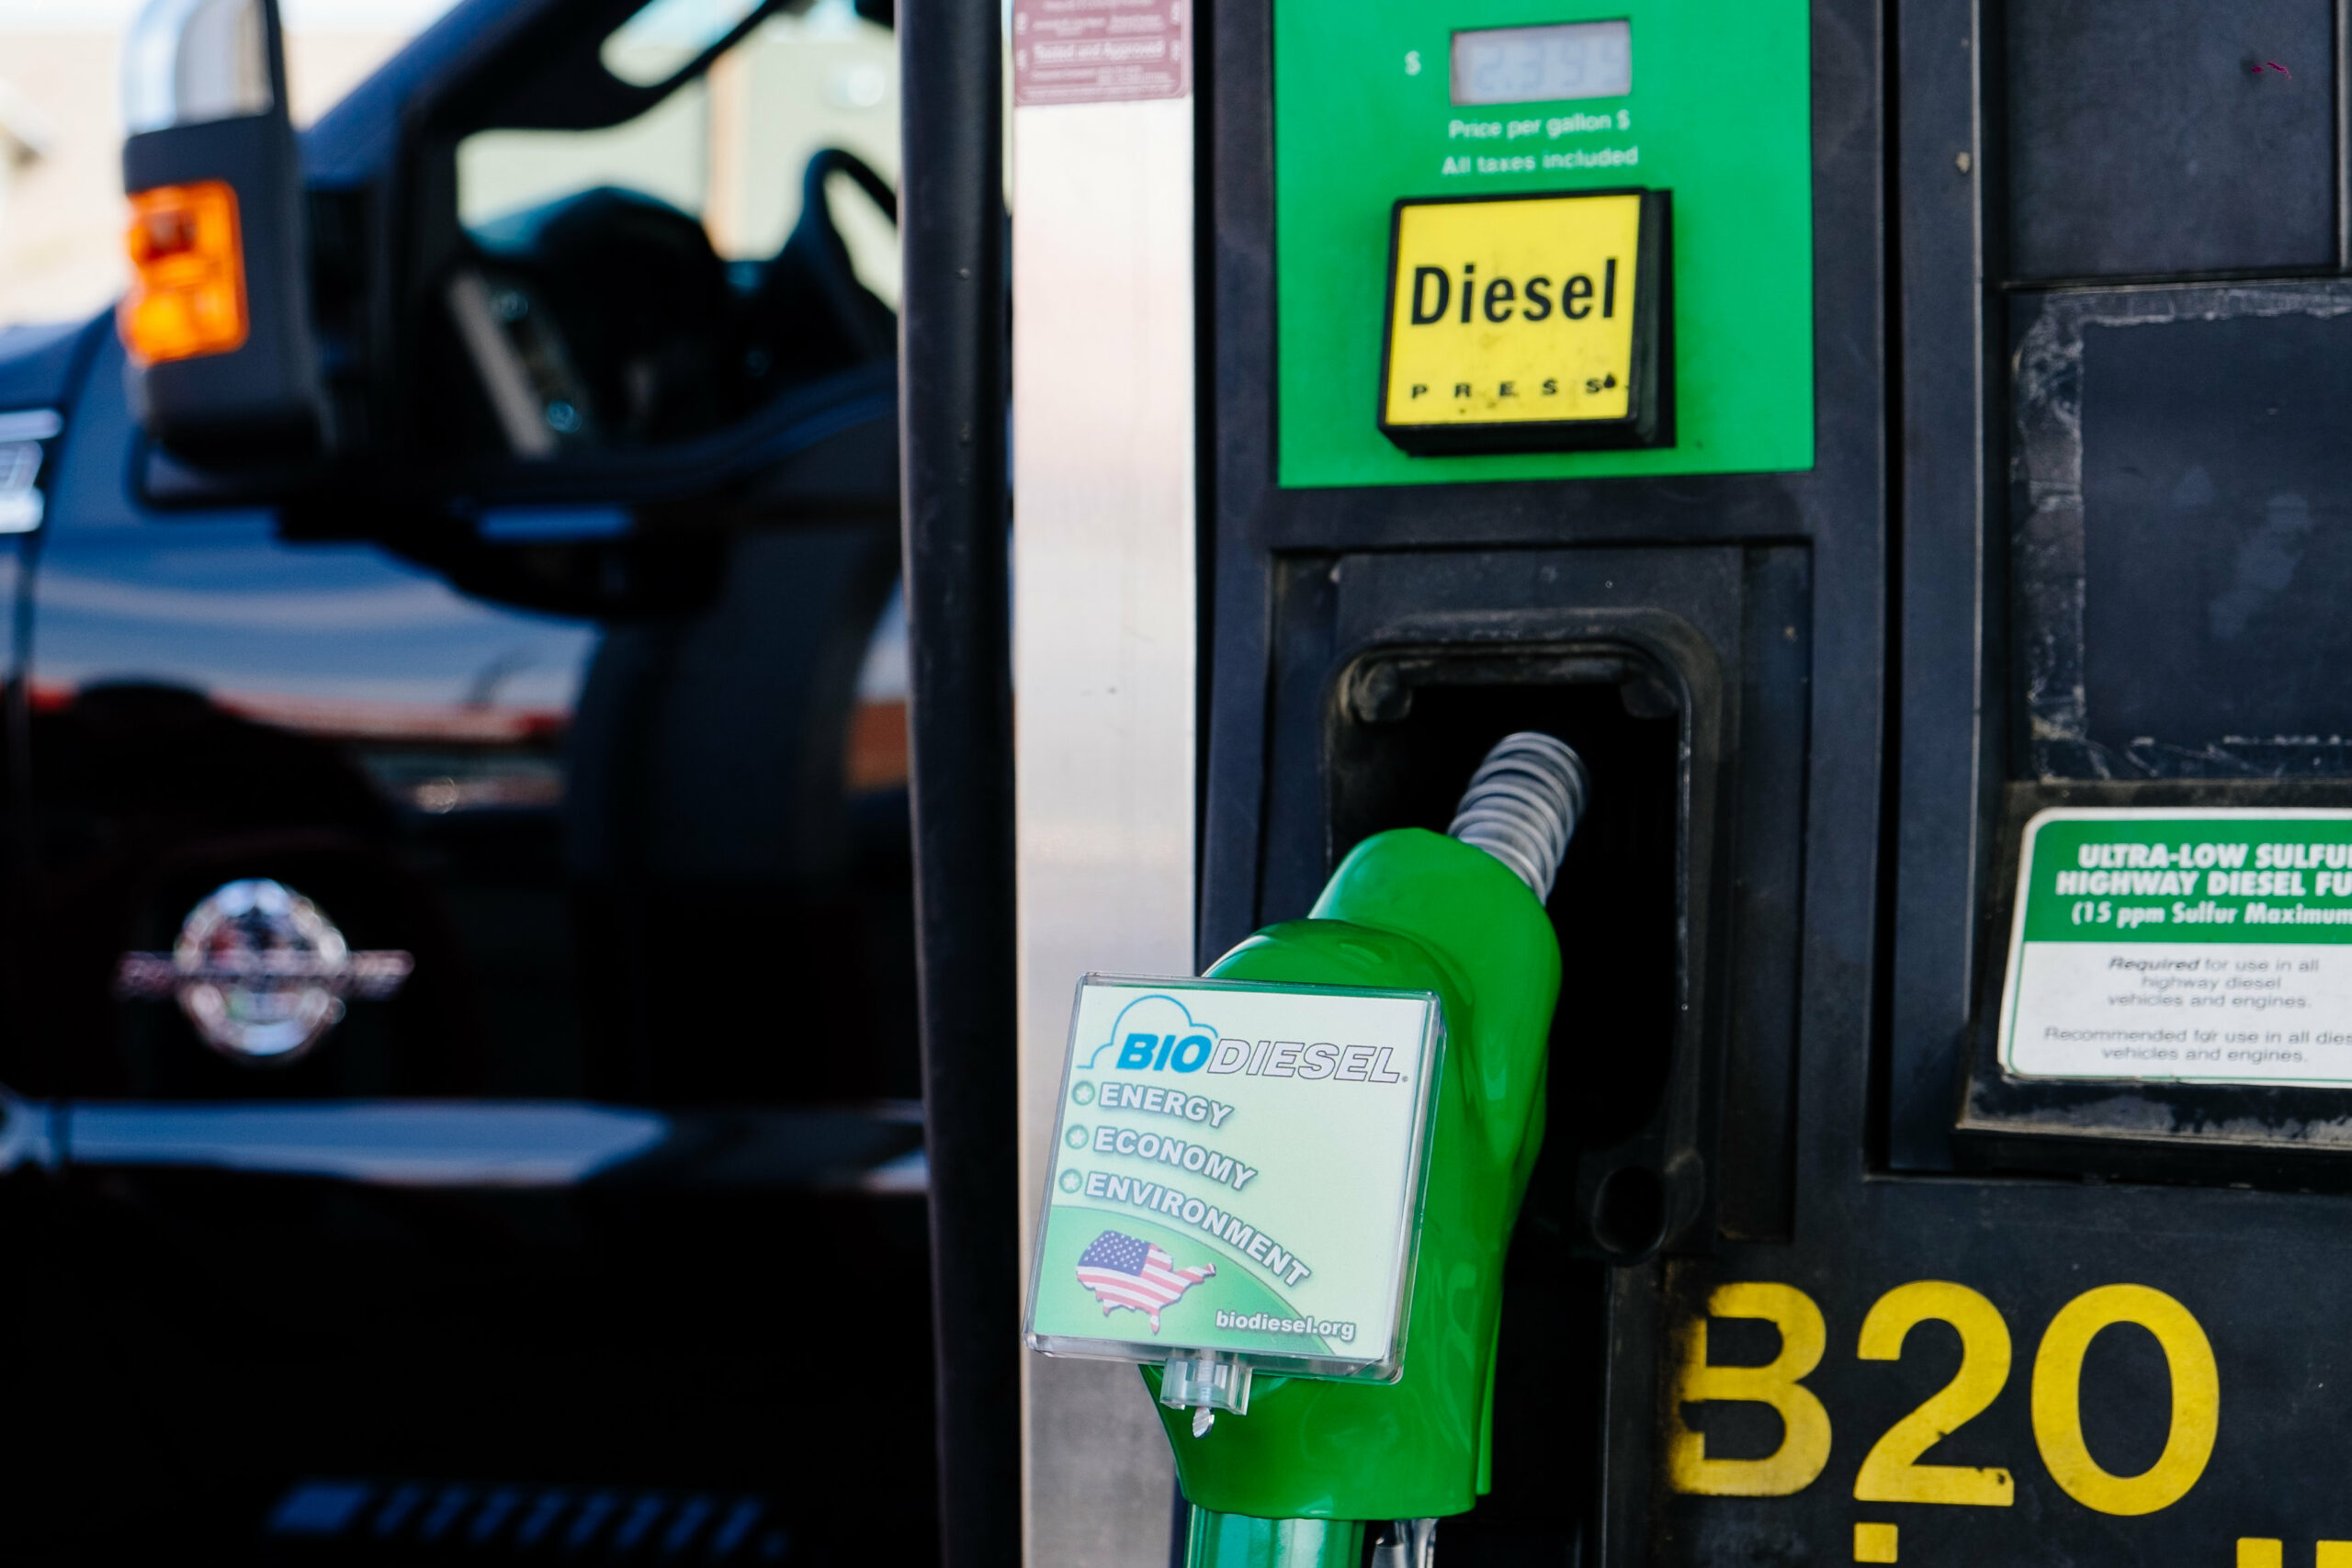 Biodiesel: Better, Cleaner, Now!